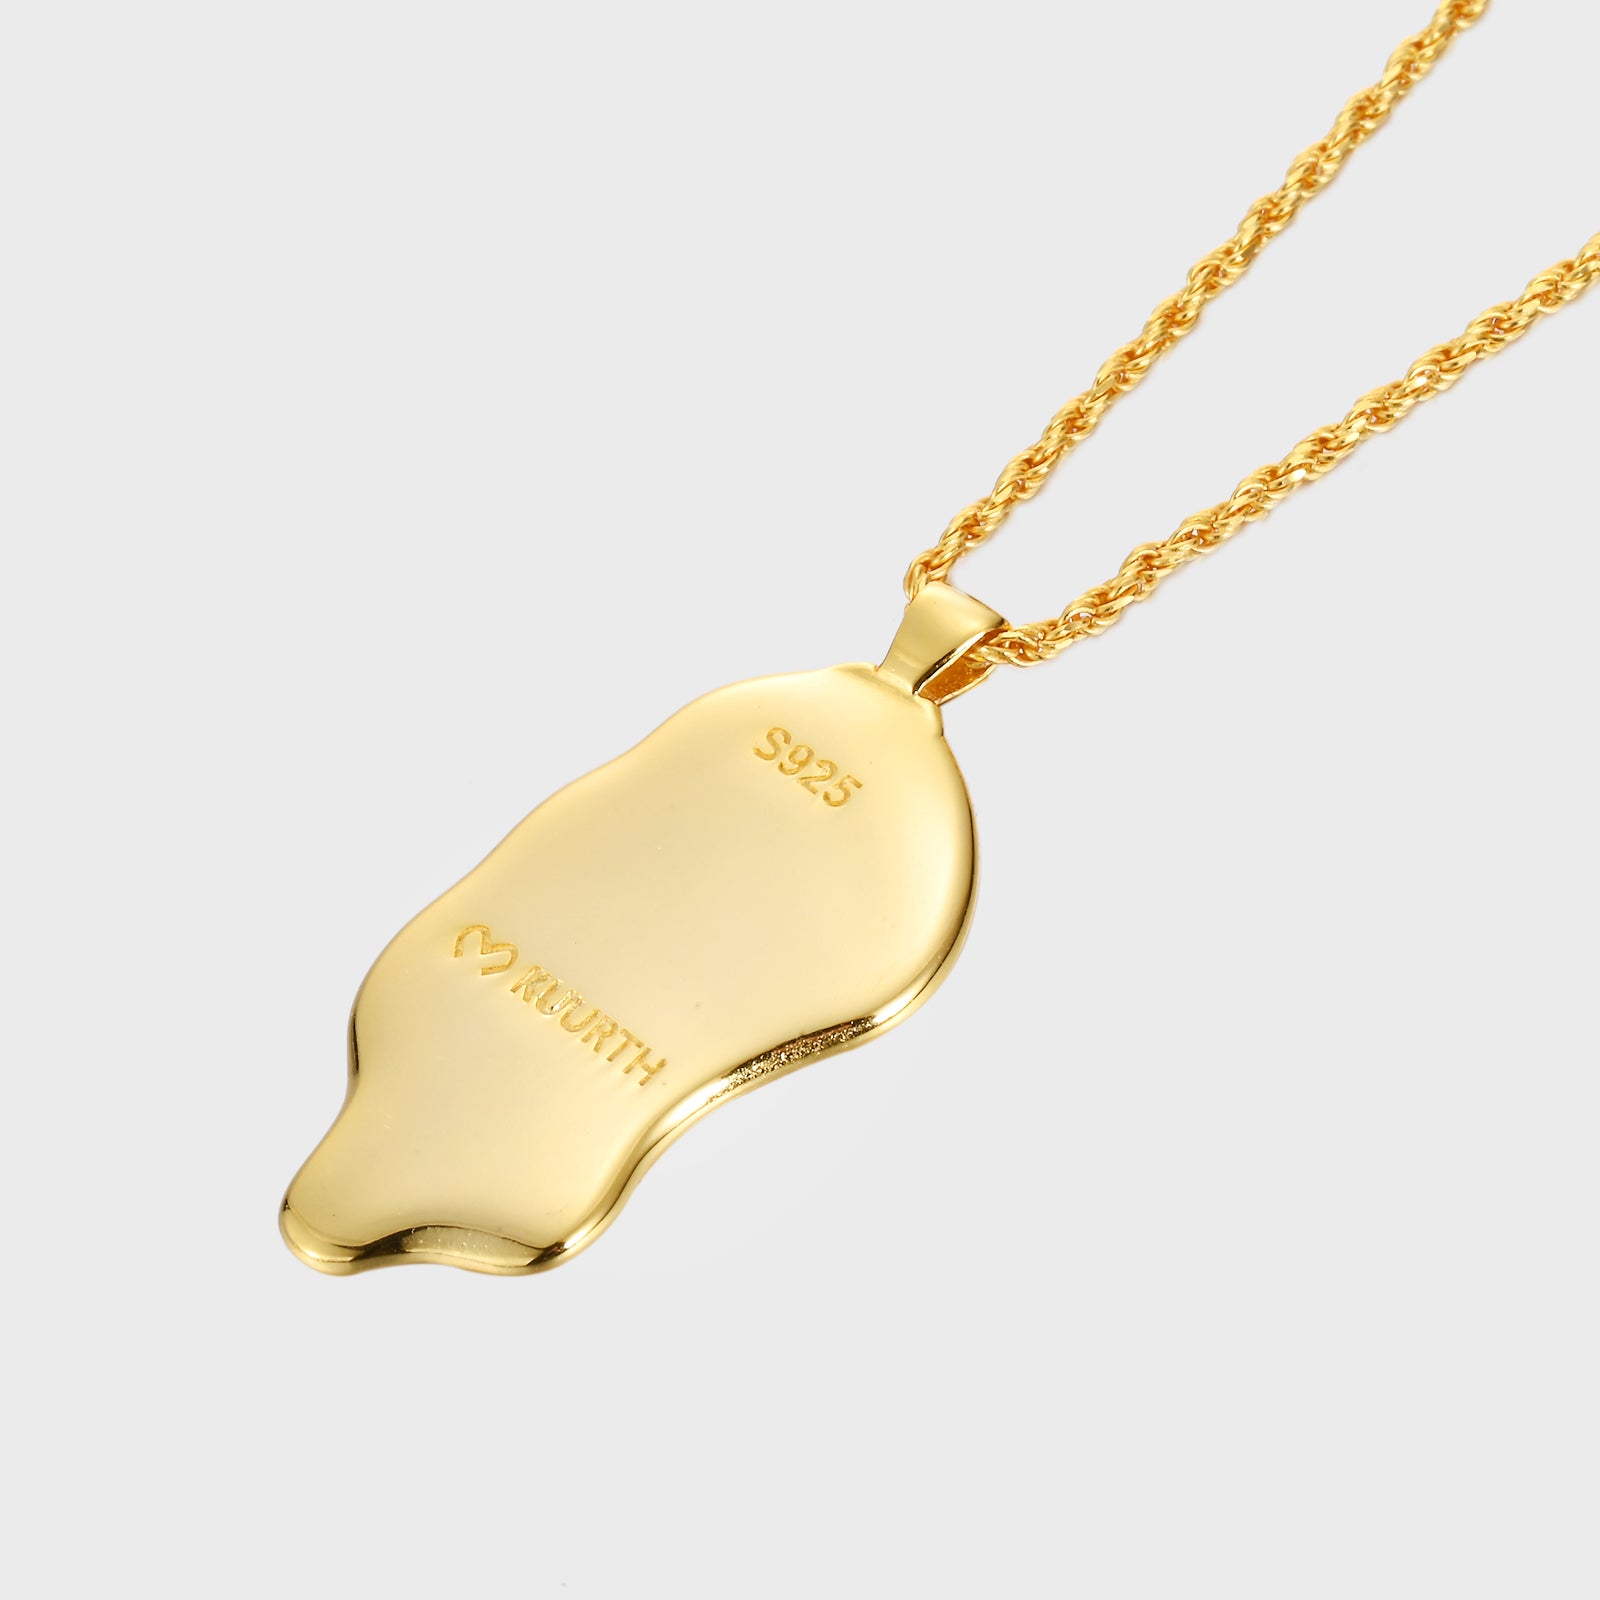 Soft Watch Exploding - Gold Necklace